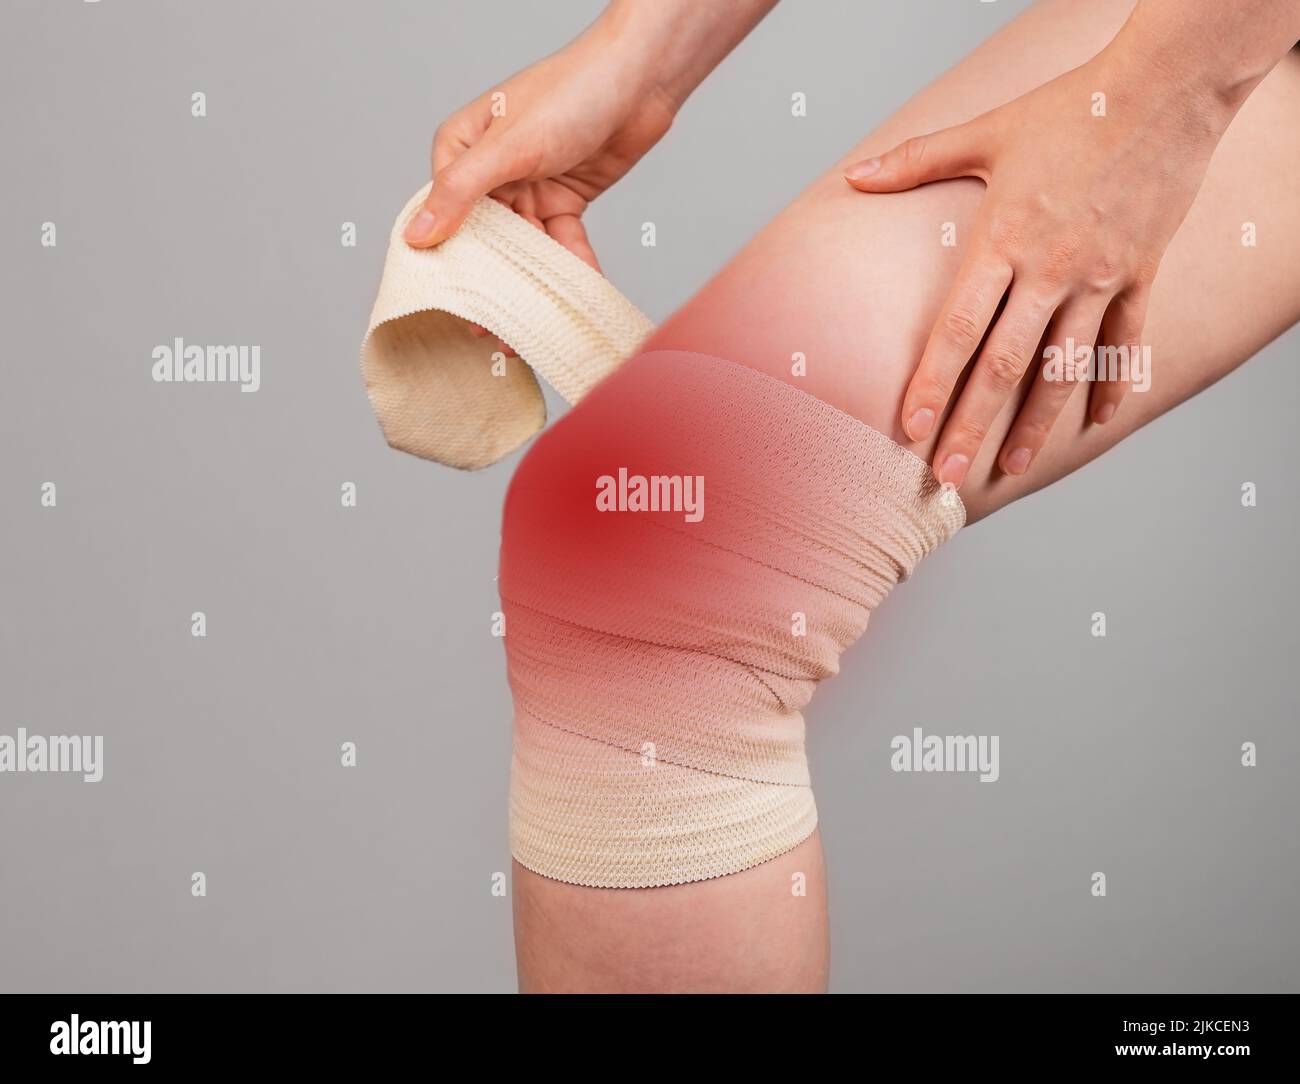 Woman wrapping elastic bandage around painful knee to relieve pain or prevent injury. Female suffering from leg discomfort. Sprained ligaments, torn cartilage. High quality photo Stock Photo